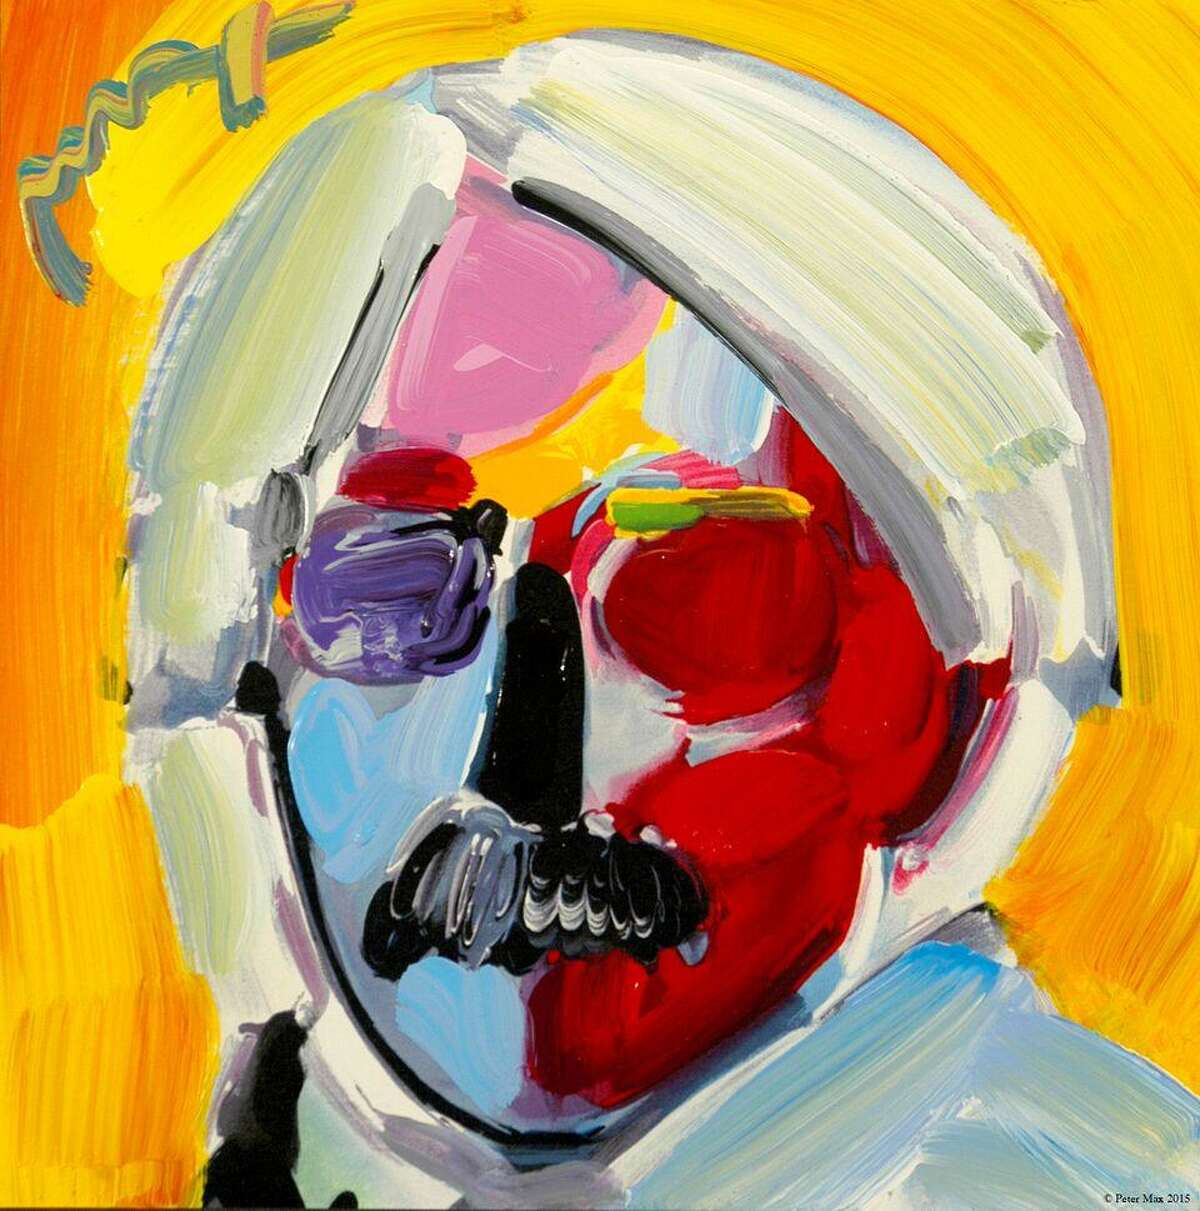 “Andy Warhol” is by pop artist Peter Max. His works will be on view Oct. 13-22 at the C. Parker Gallery in Greenwich, and the artist will be celebrated at two public events during the run.